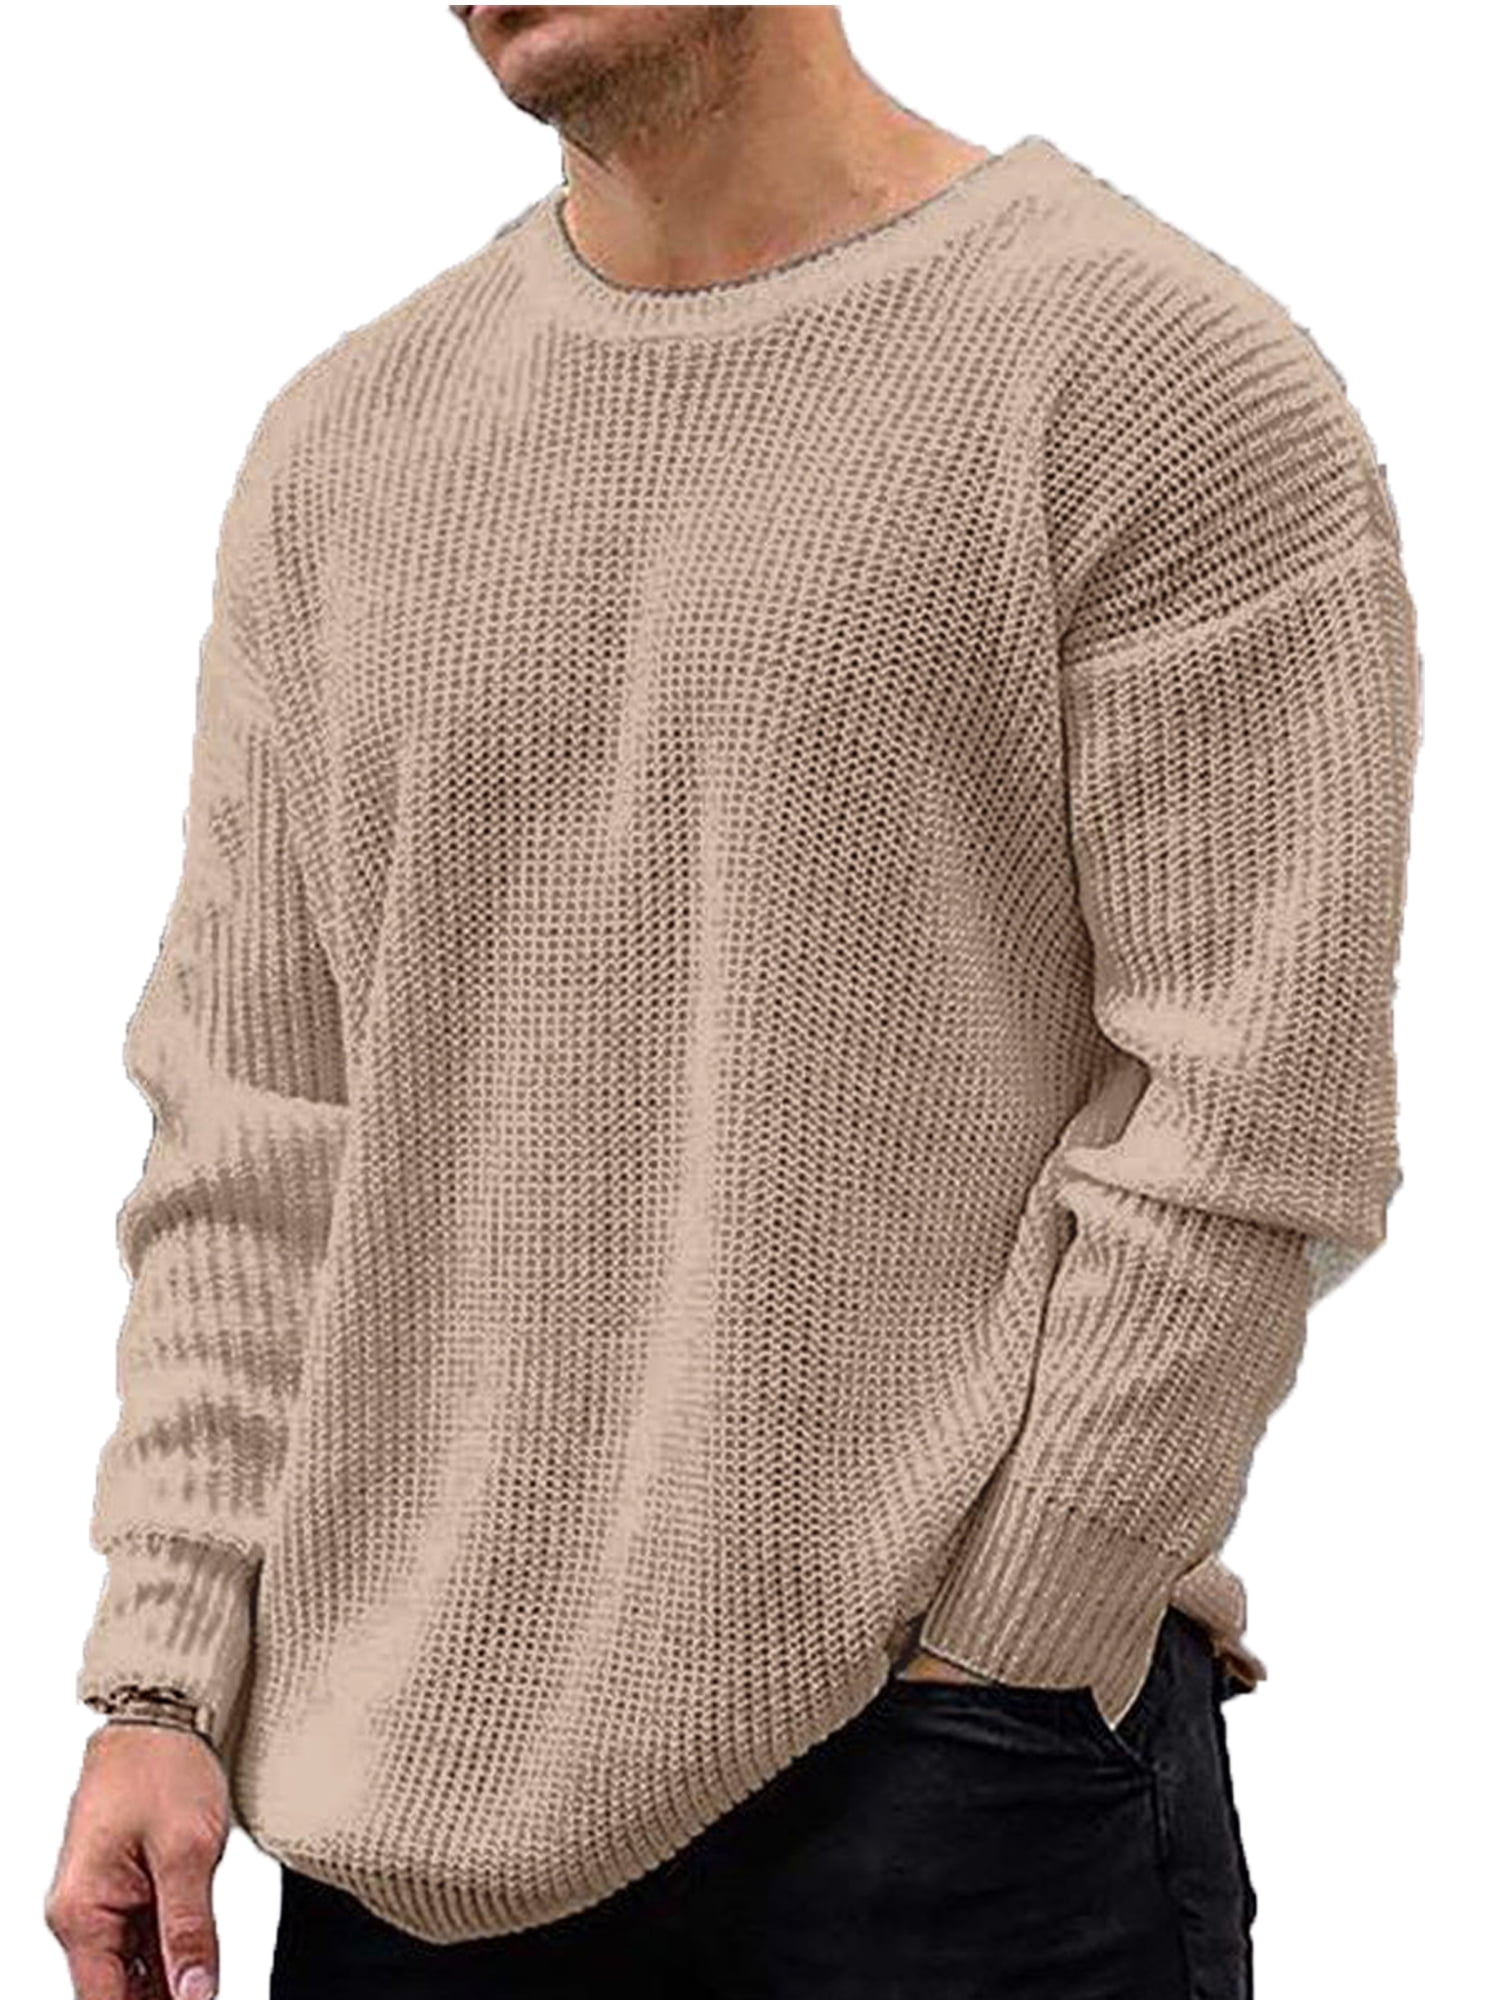 luethbiezx Men Loose Sweater Long Sleeve Crew Neck Ribbed Knit Pullover  Thermal Top